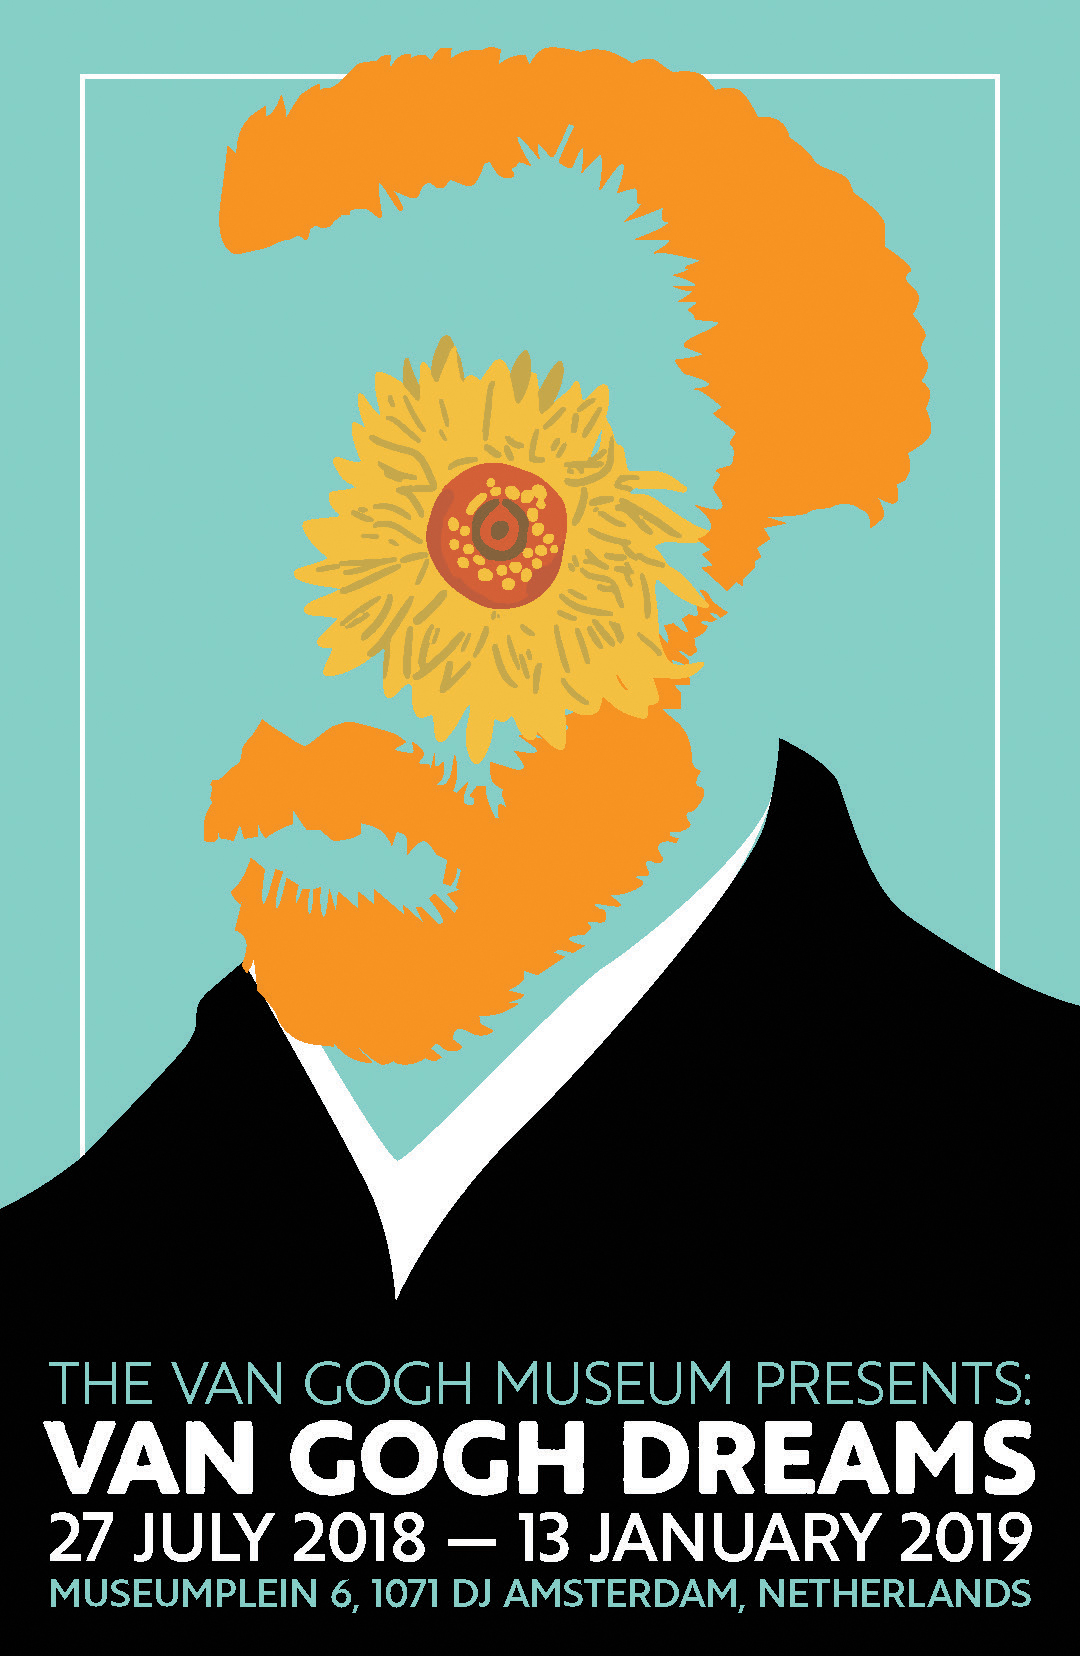 This poster design features a simple minimalist abstract illustration of the artist Vincent Van Gogh. The stylization is based off of the illustrator Noma Bar's works. The only things in the illustration are Van Gogh's hair and beard, his suit, and a stylized illustration of a Sunflower from one of his paintings. The colors are extremely limited with the background being teal, his hair being a solid shade of orange, the black and white of his clothes, and the colors in the sunflower. There is a thin white border behind Van Gogh. At the bottom of the poster is information on the exhibit it is advertising. The typography alternates between the teal in the background and white, helping push the typographical hierarchy to the exhibit name and dates.